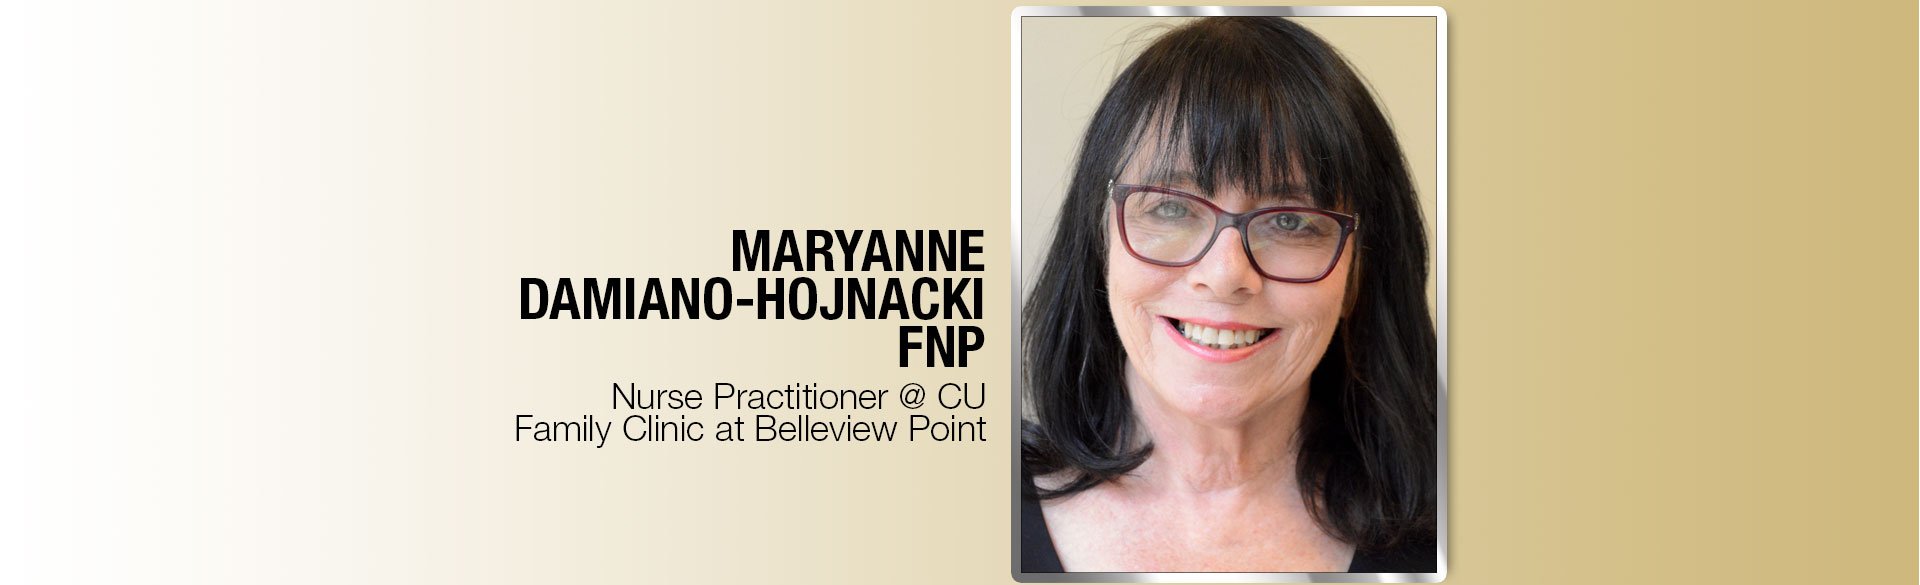 Maryanne Damiano-Hojnacki, a Nurse Practitioner at CU Family Clinic at Belleview Point